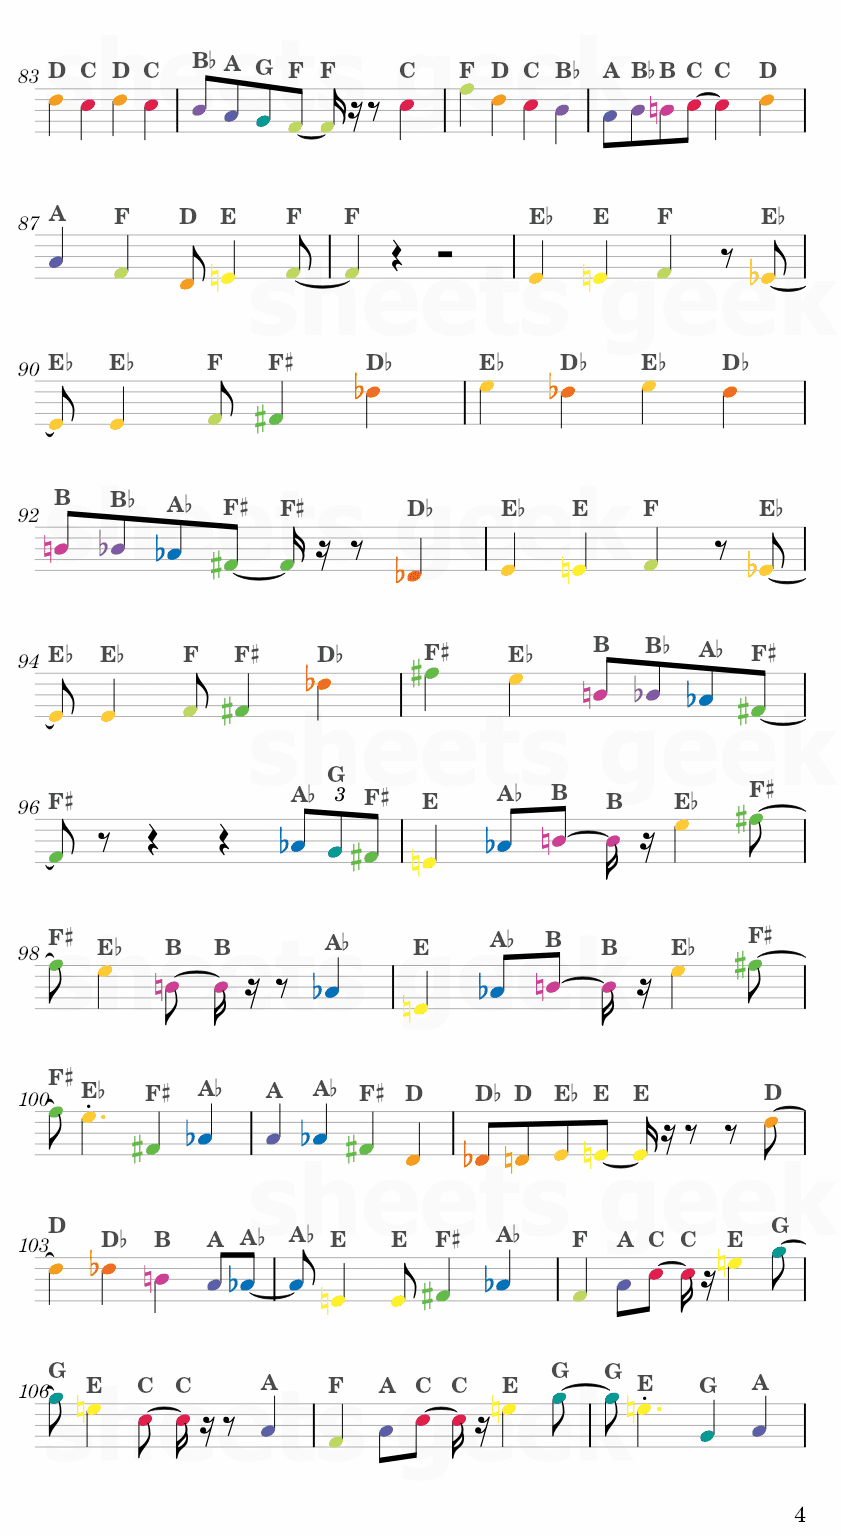 Coconut Mall - Mario Kart Wii Easy Sheet Music Free for piano, keyboard, flute, violin, sax, cello page 4